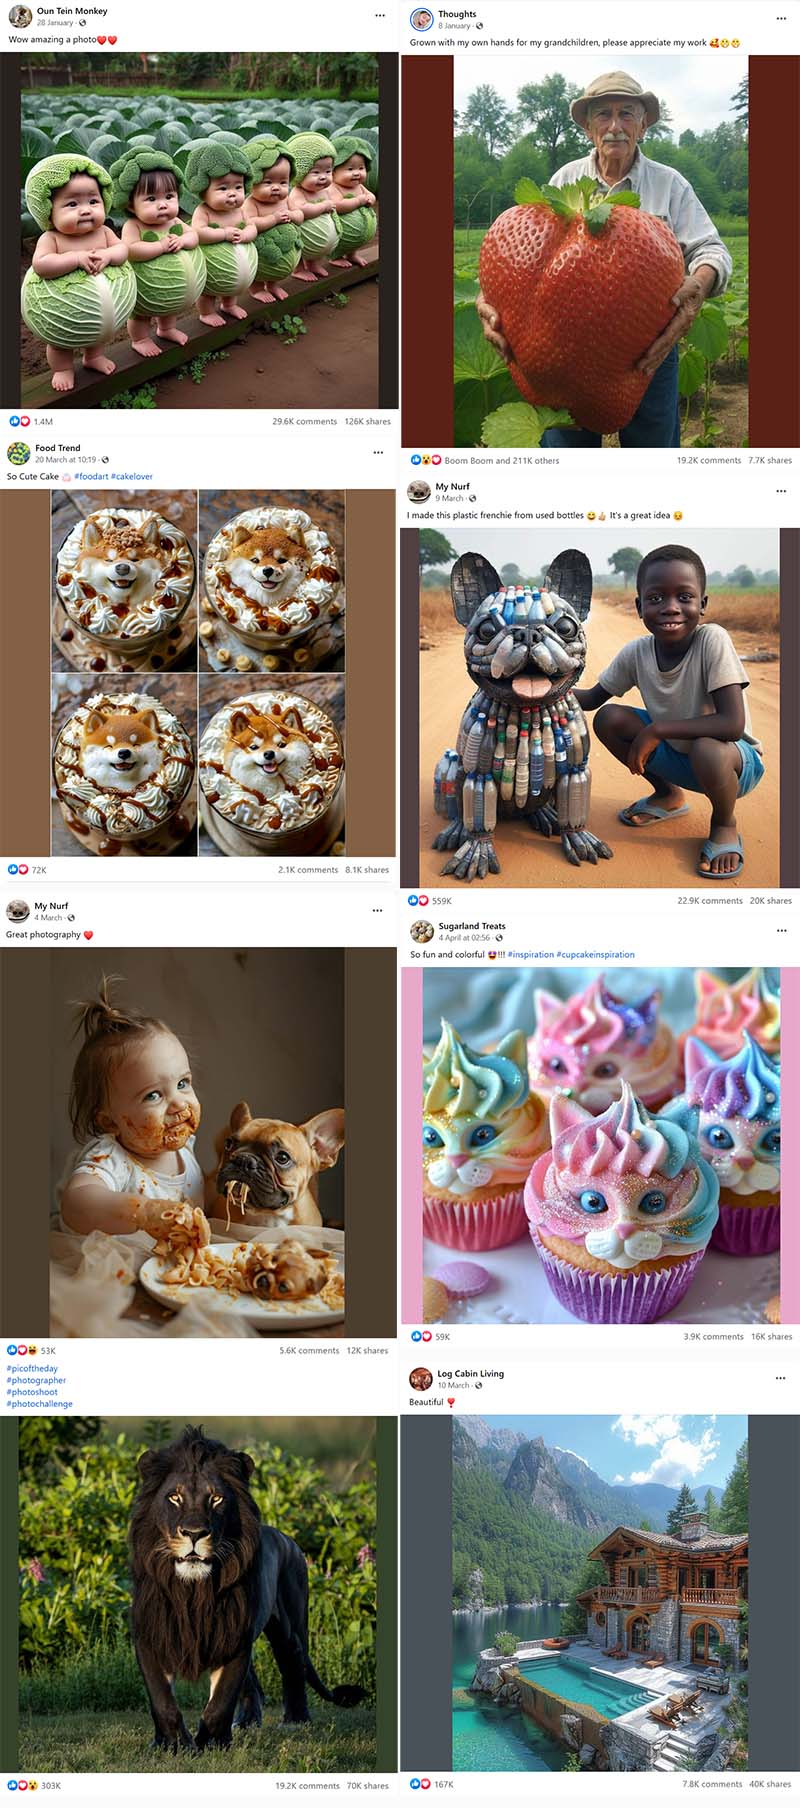 Collage of AI Facebook pictures, from babies dressed in cabbage, to gigantic strawberry, "made it with my own hands" creation of plastic bottles, food art, log cabins, and a black lion. All of it is fake, but presented as real photography.